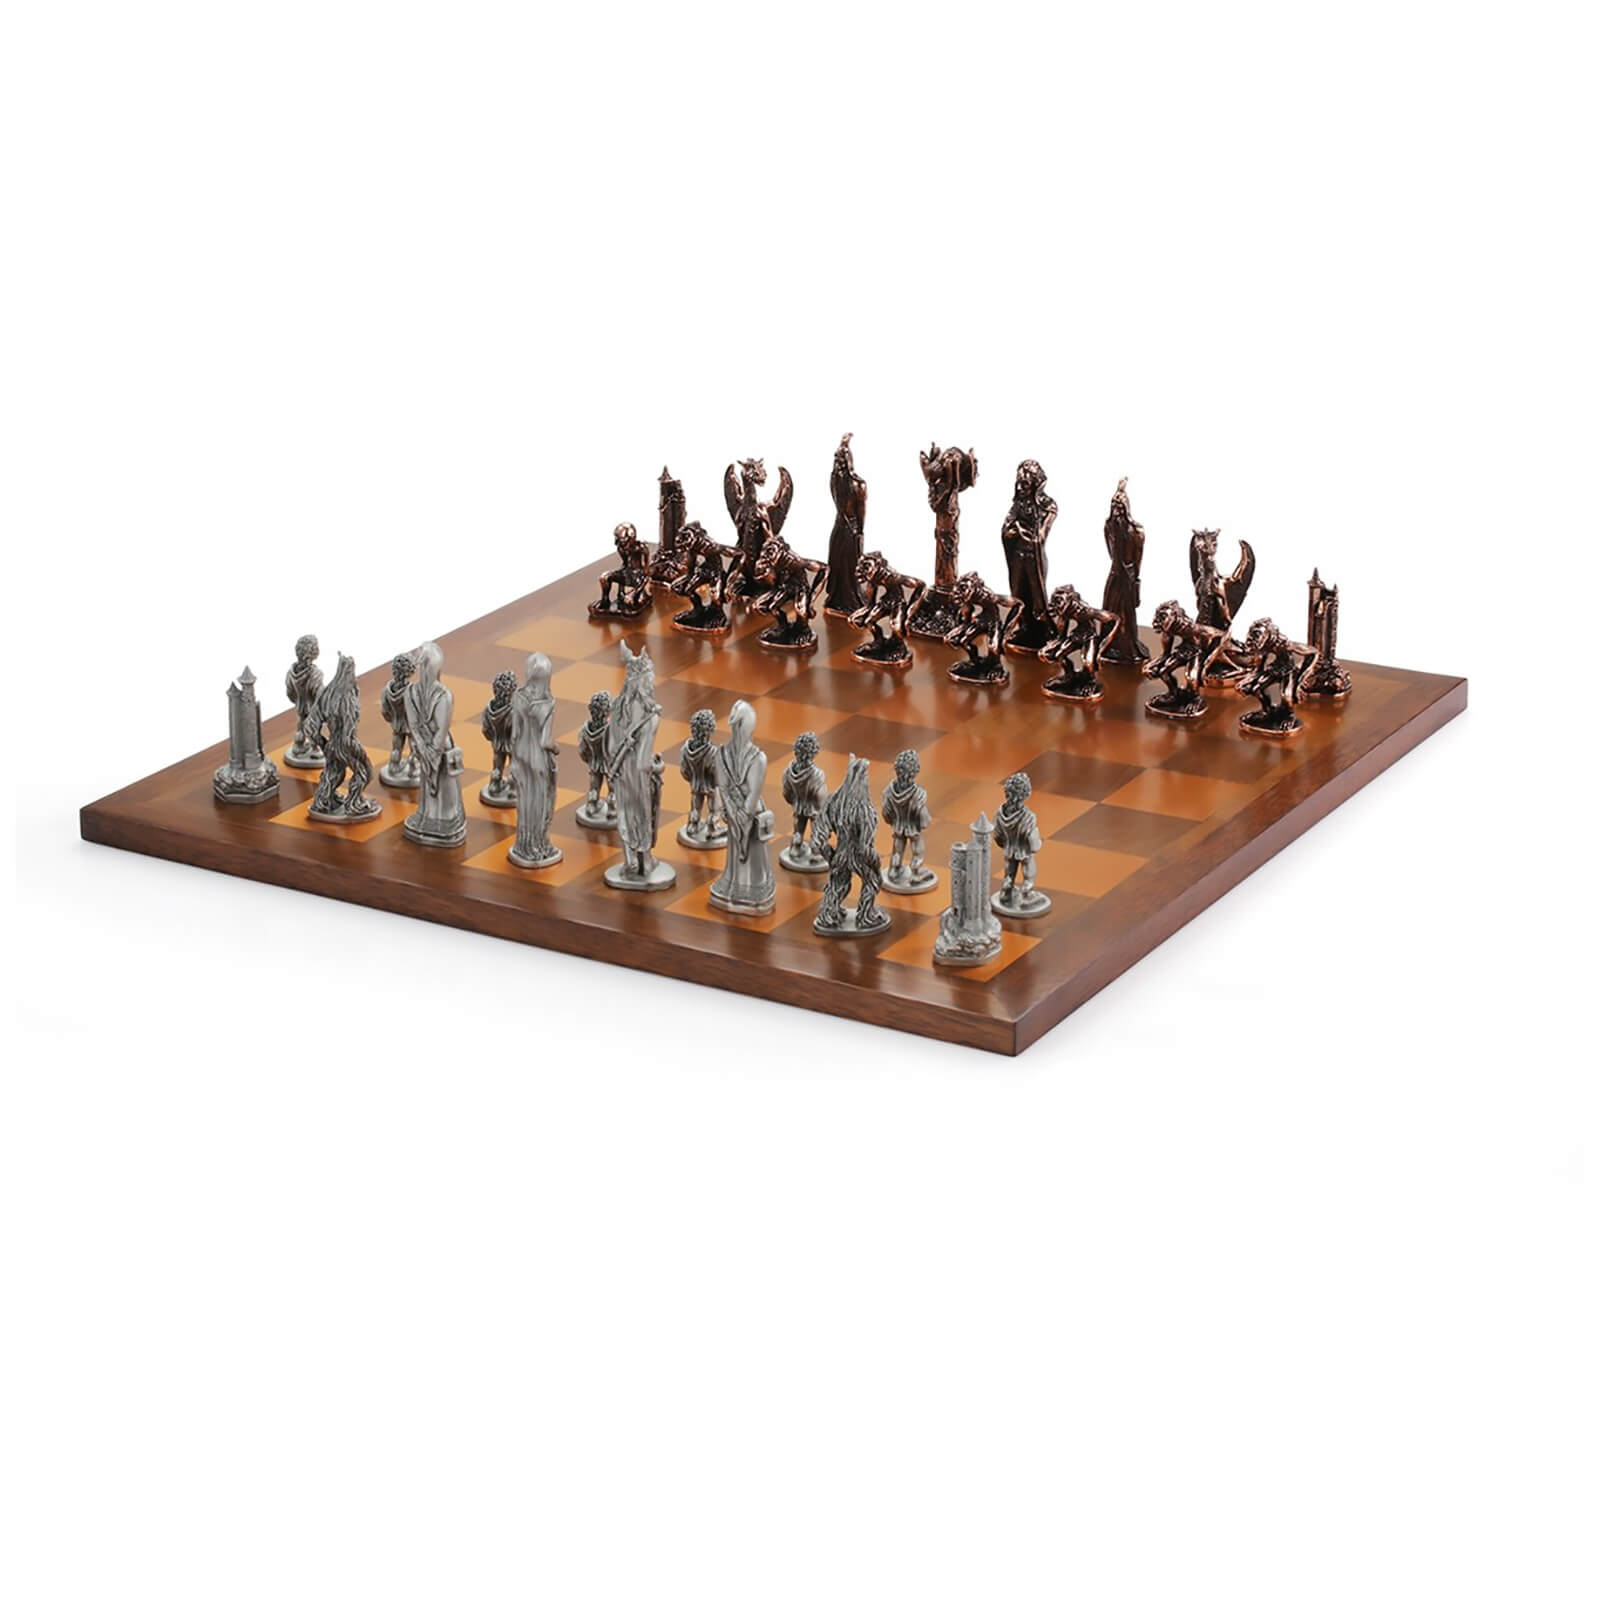 Royal Selangor Lord of the Rings Chess Set - War of the Rings